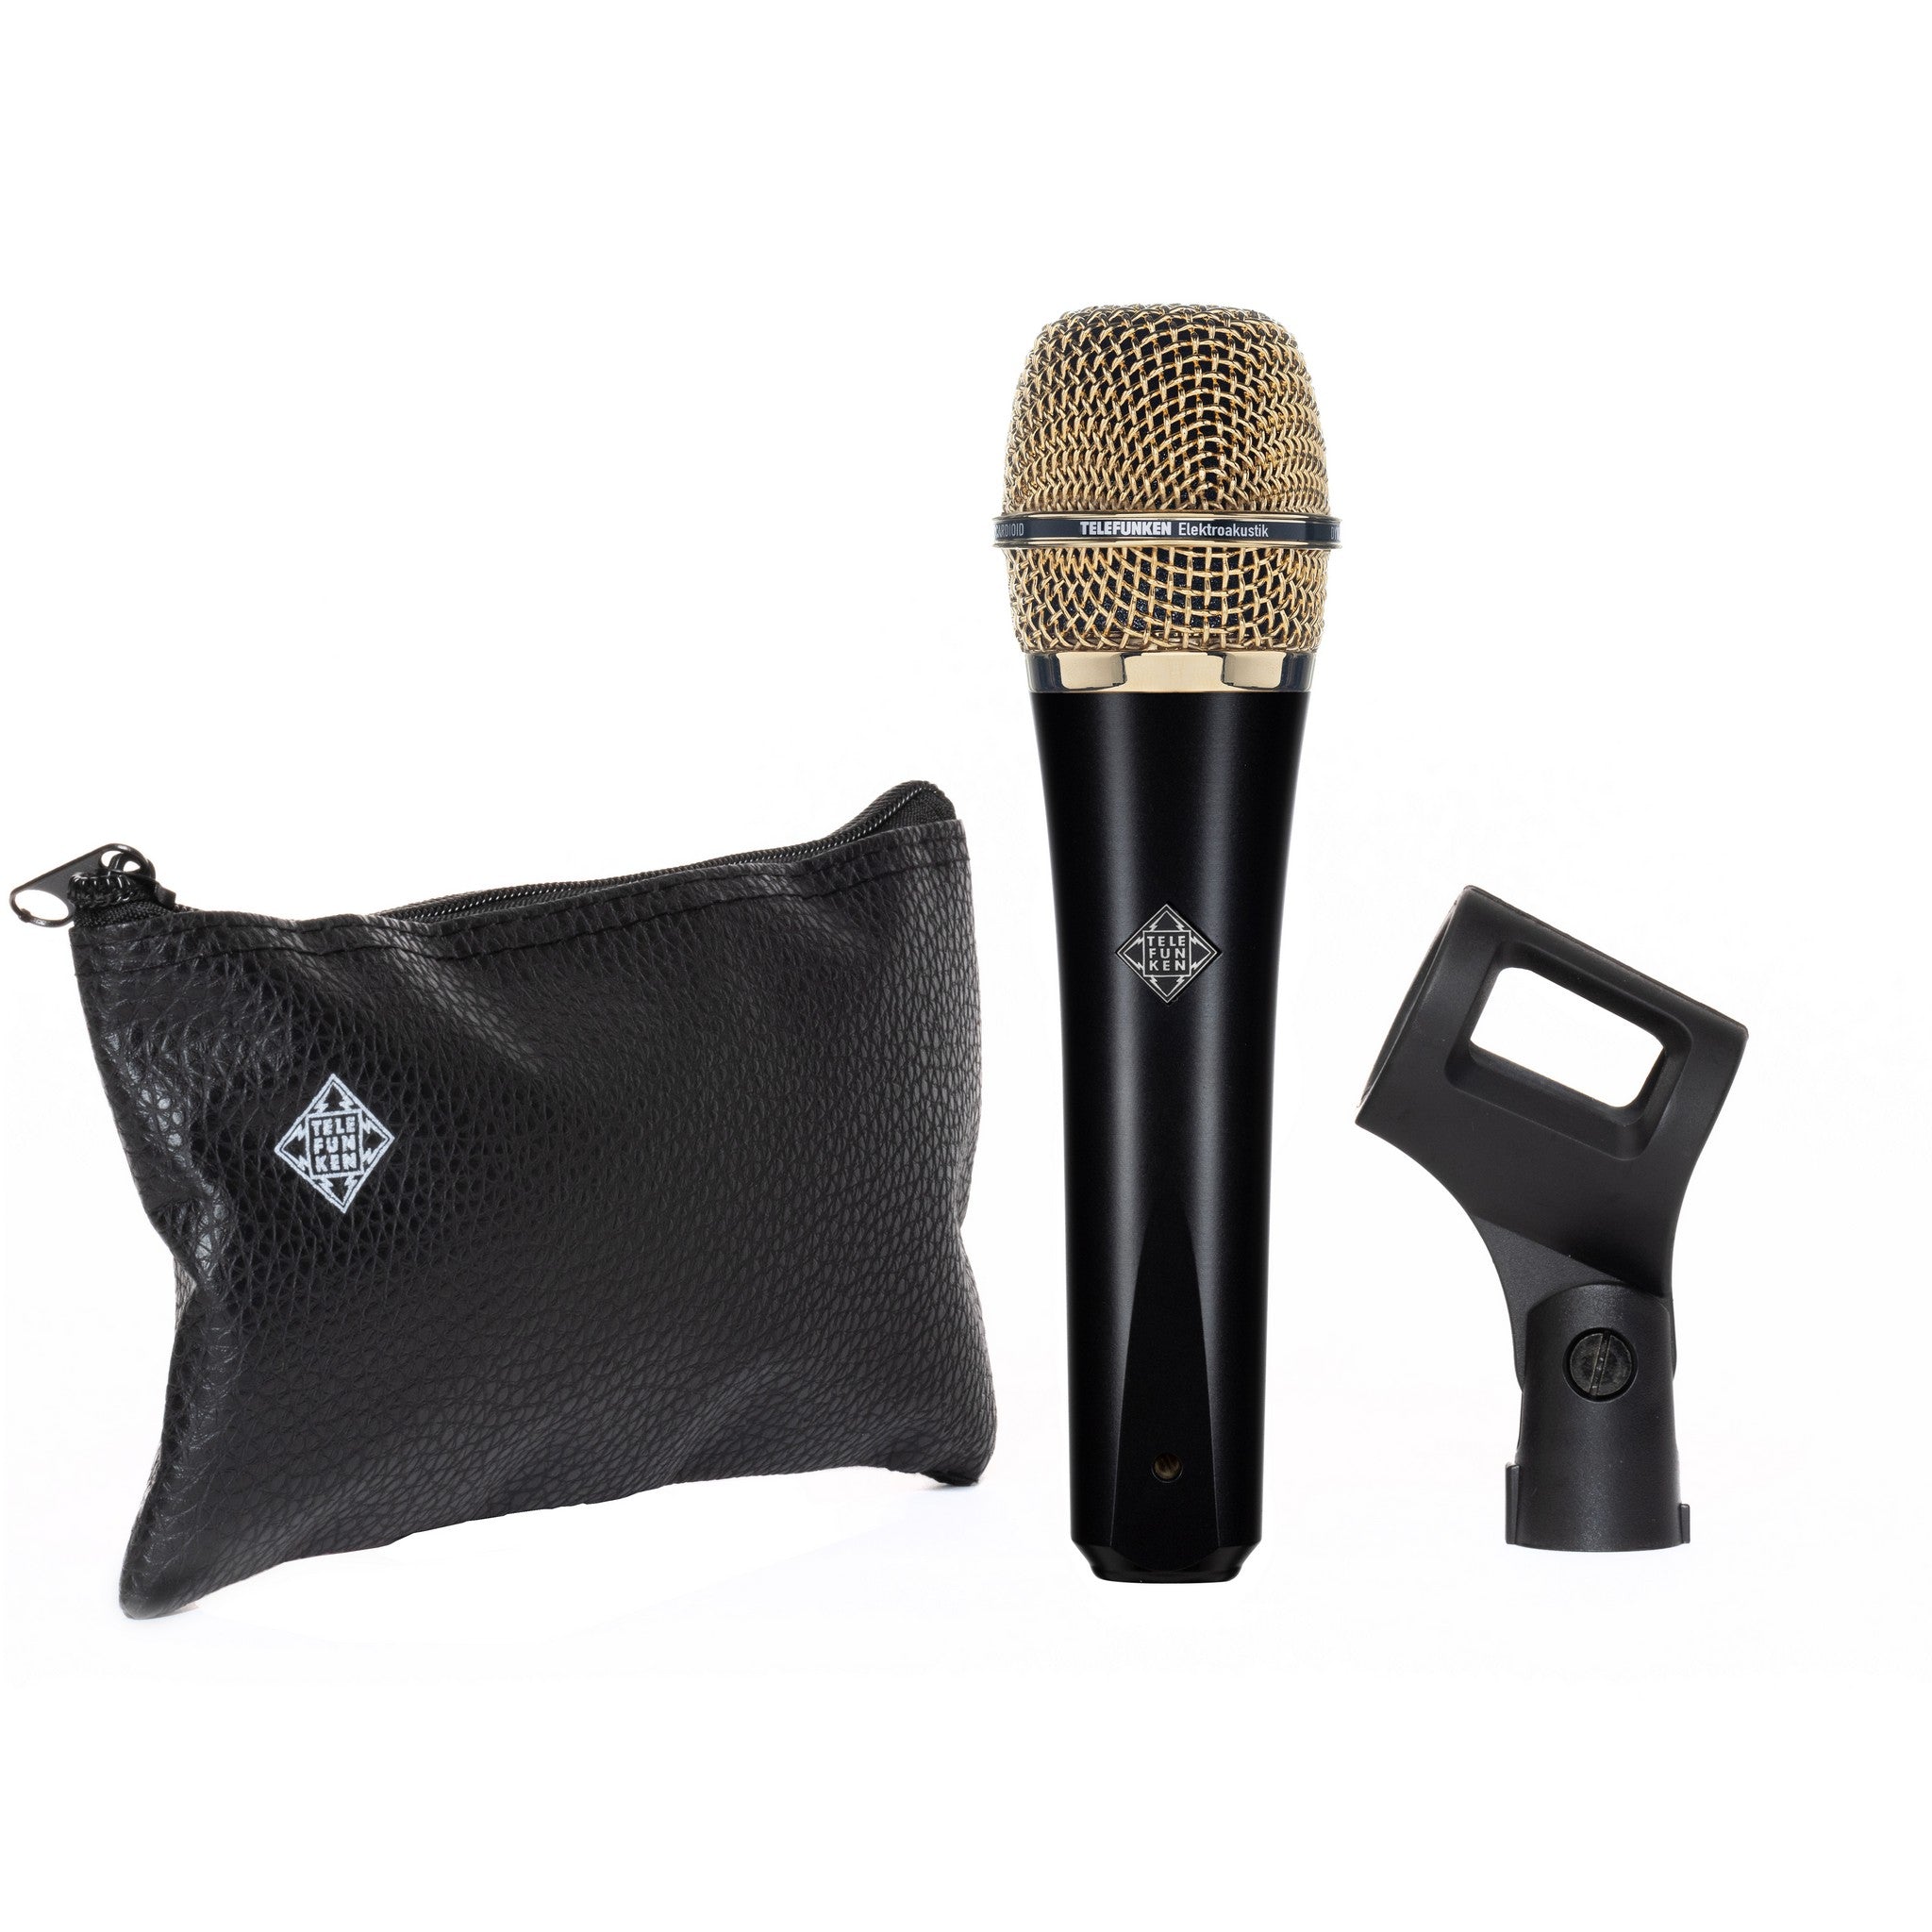 Telefunken M80 Supercardioid Handheld Dynamic Microphone, Black with Gold  Grille